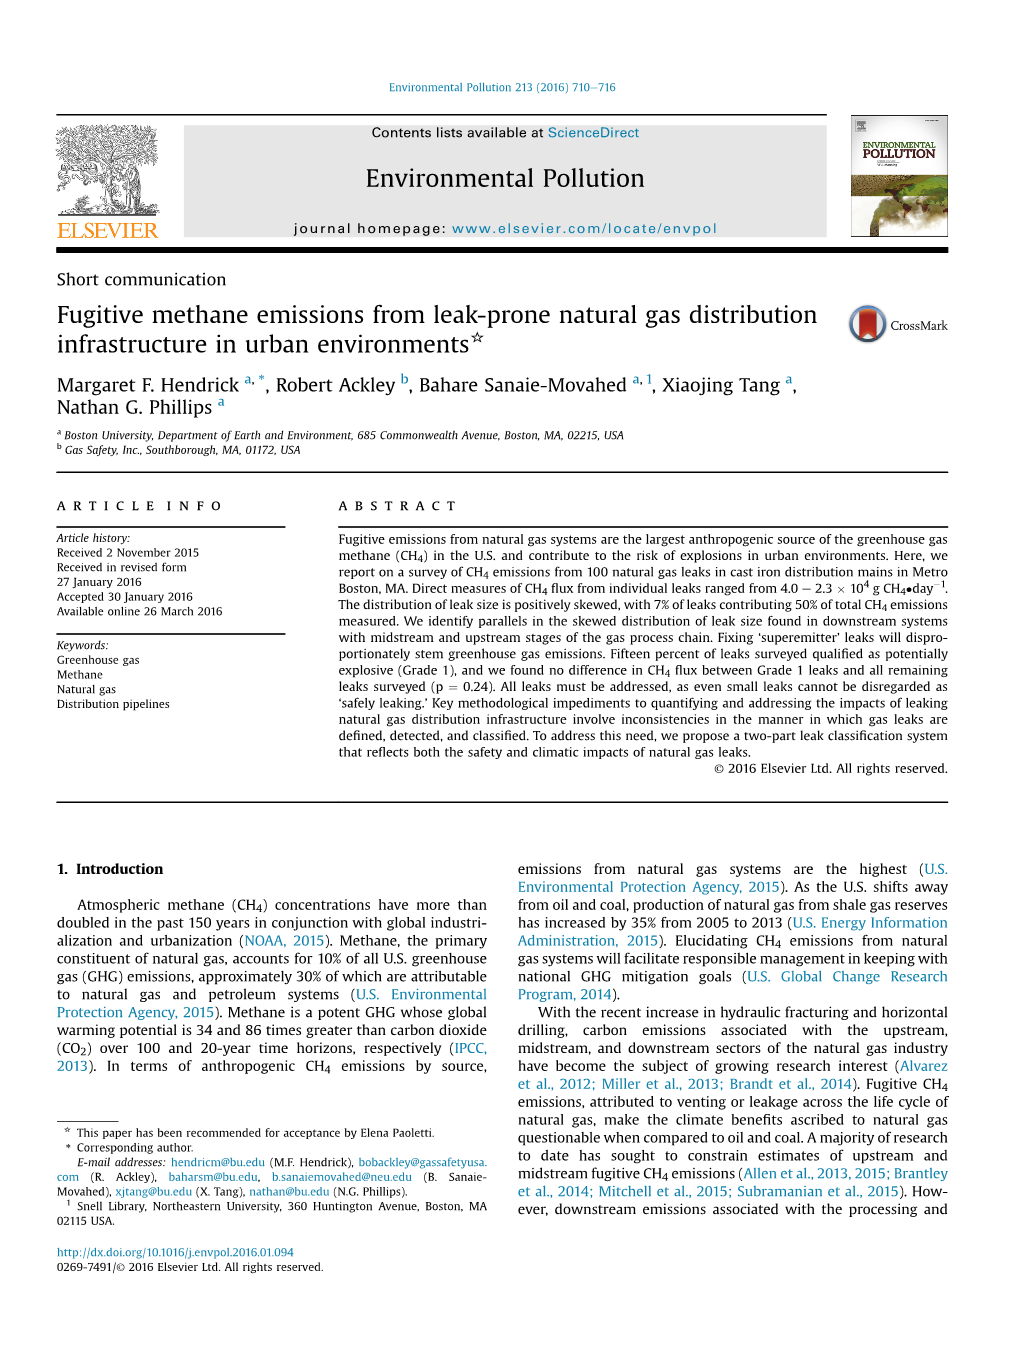 Fugitive Methane Emissions from Leak-Prone Natural Gas Distribution Infrastructure in Urban Environments*